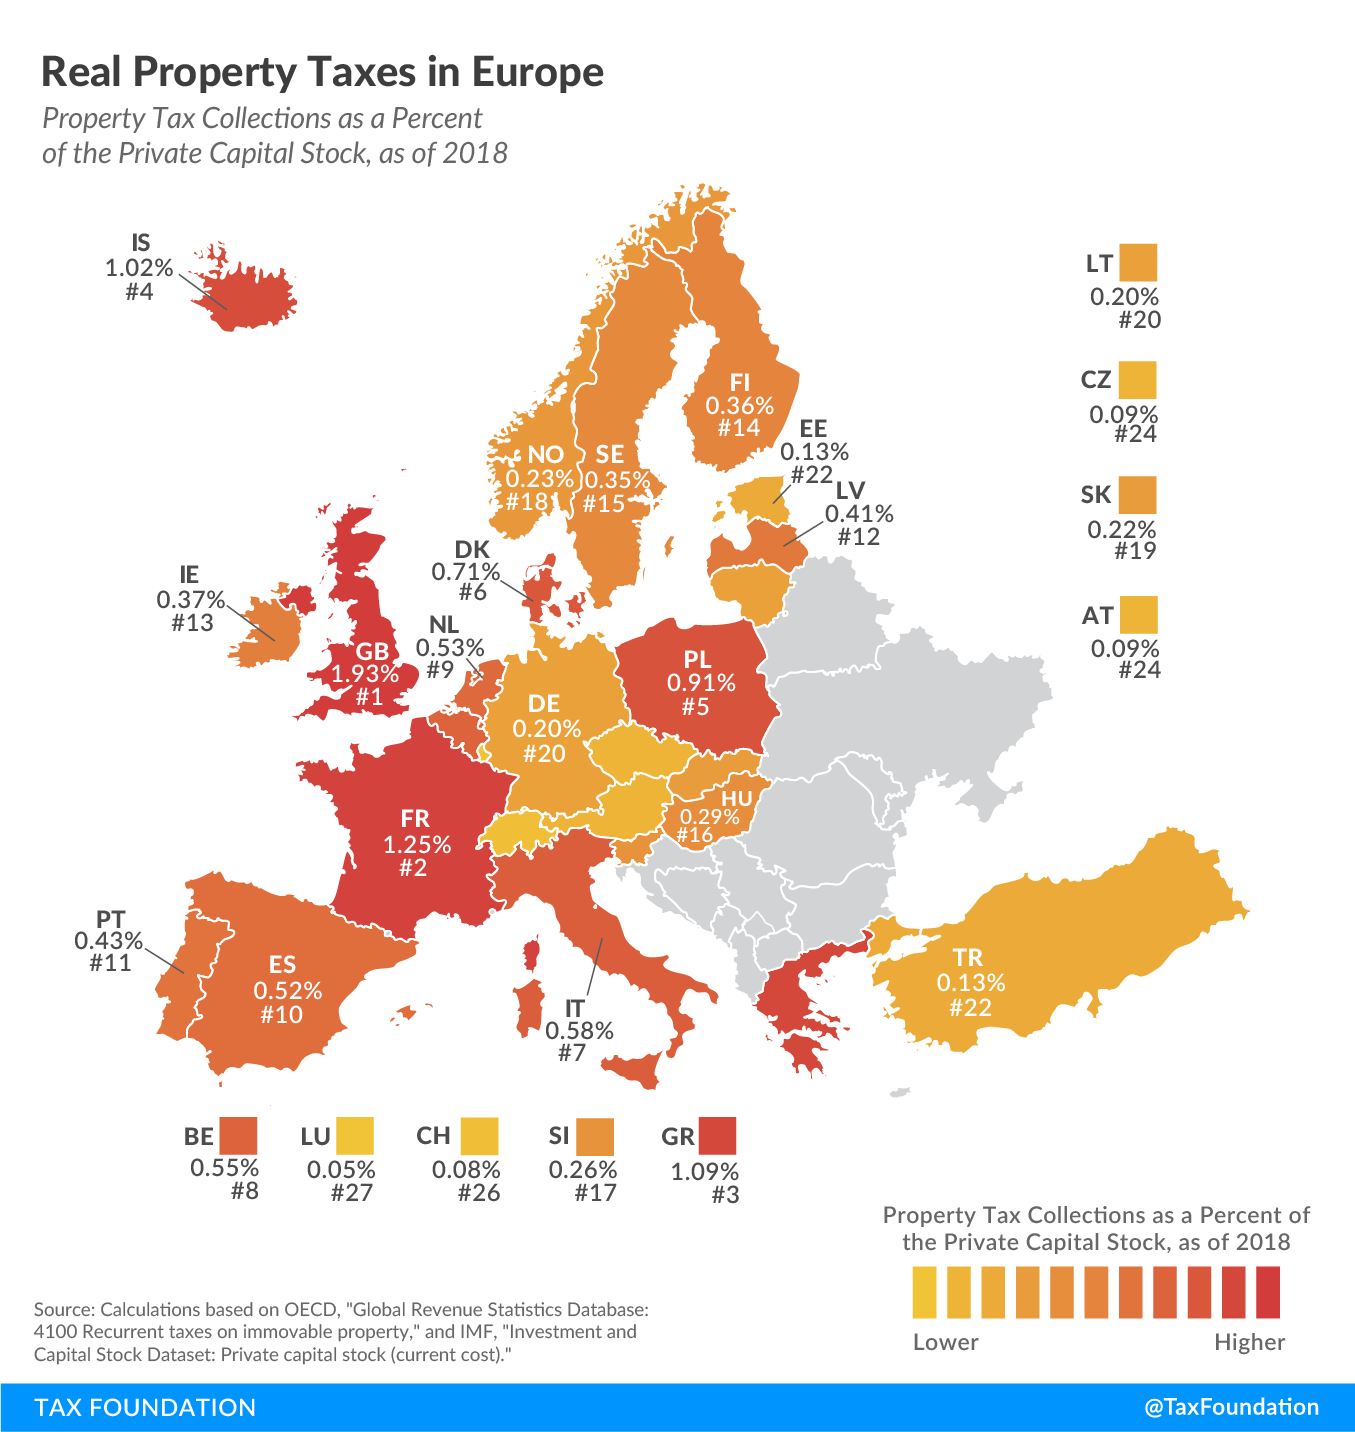 real property taxes in Europe, European property tax rankings, property tax collections as a percent of the private capital stock in 2019